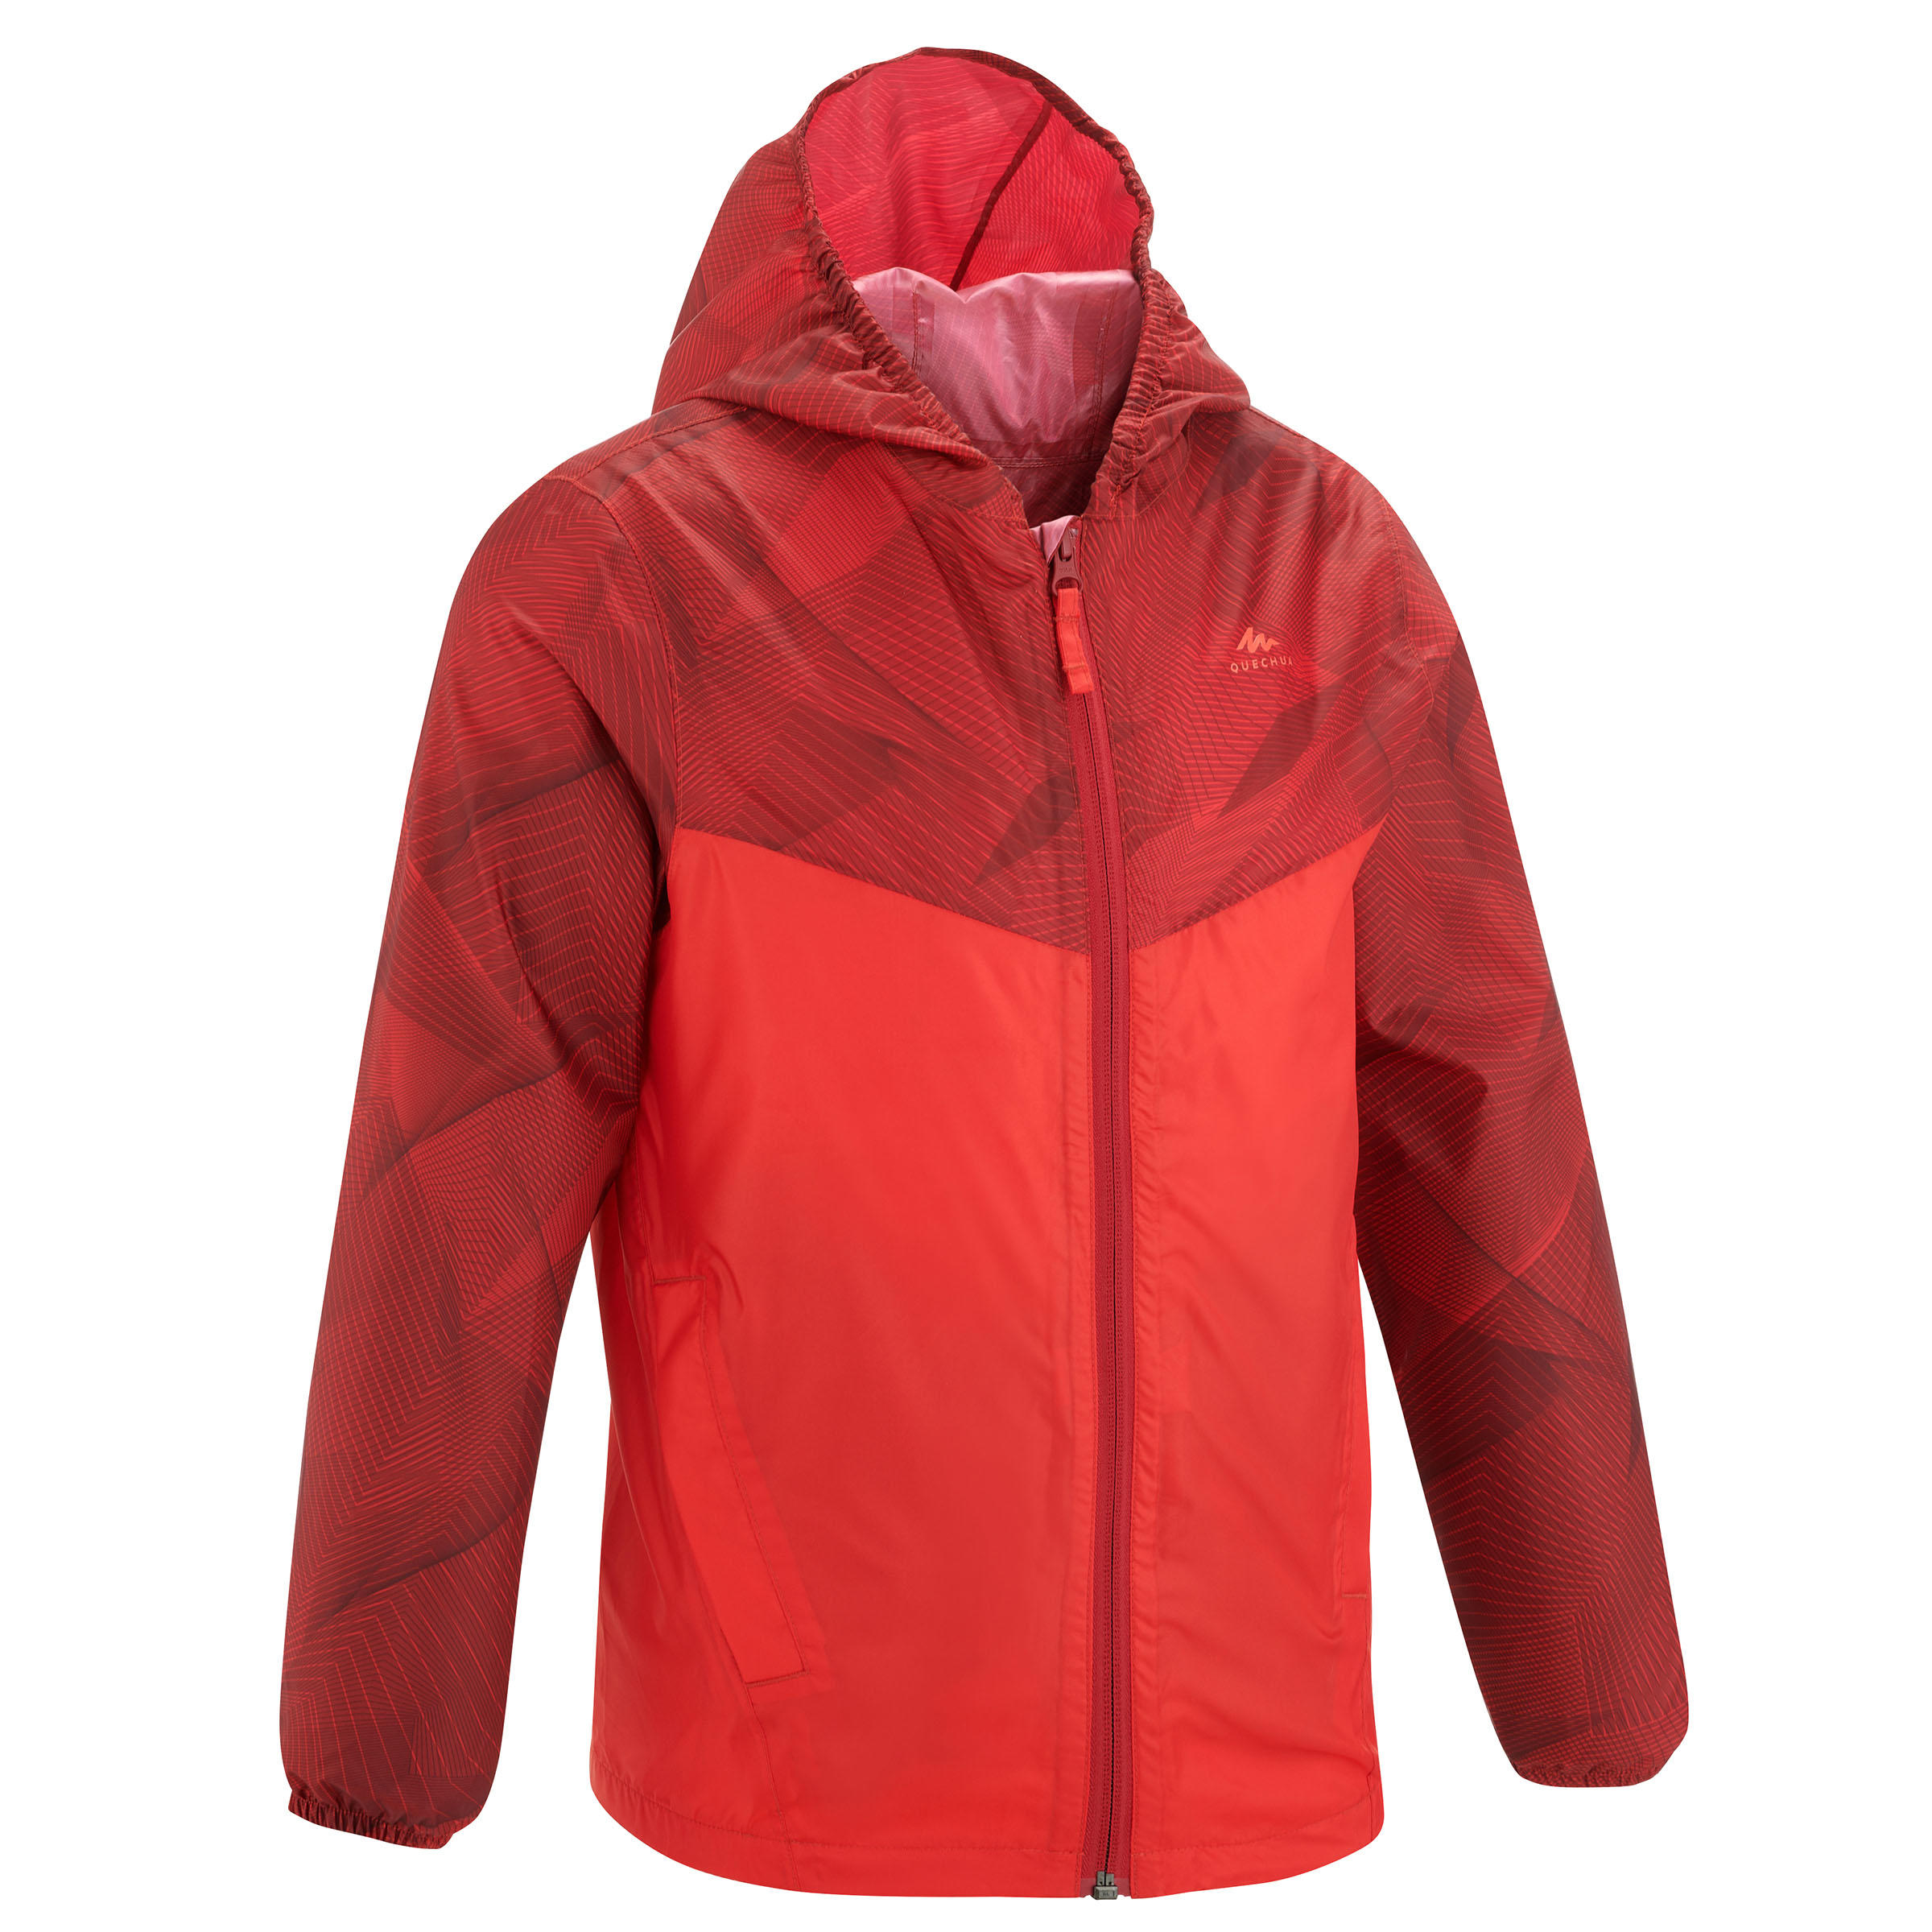 QUECHUA MH150 Kid's Waterproof Hiking Jacket from Age 7 to 15 Years - Red and Maroon